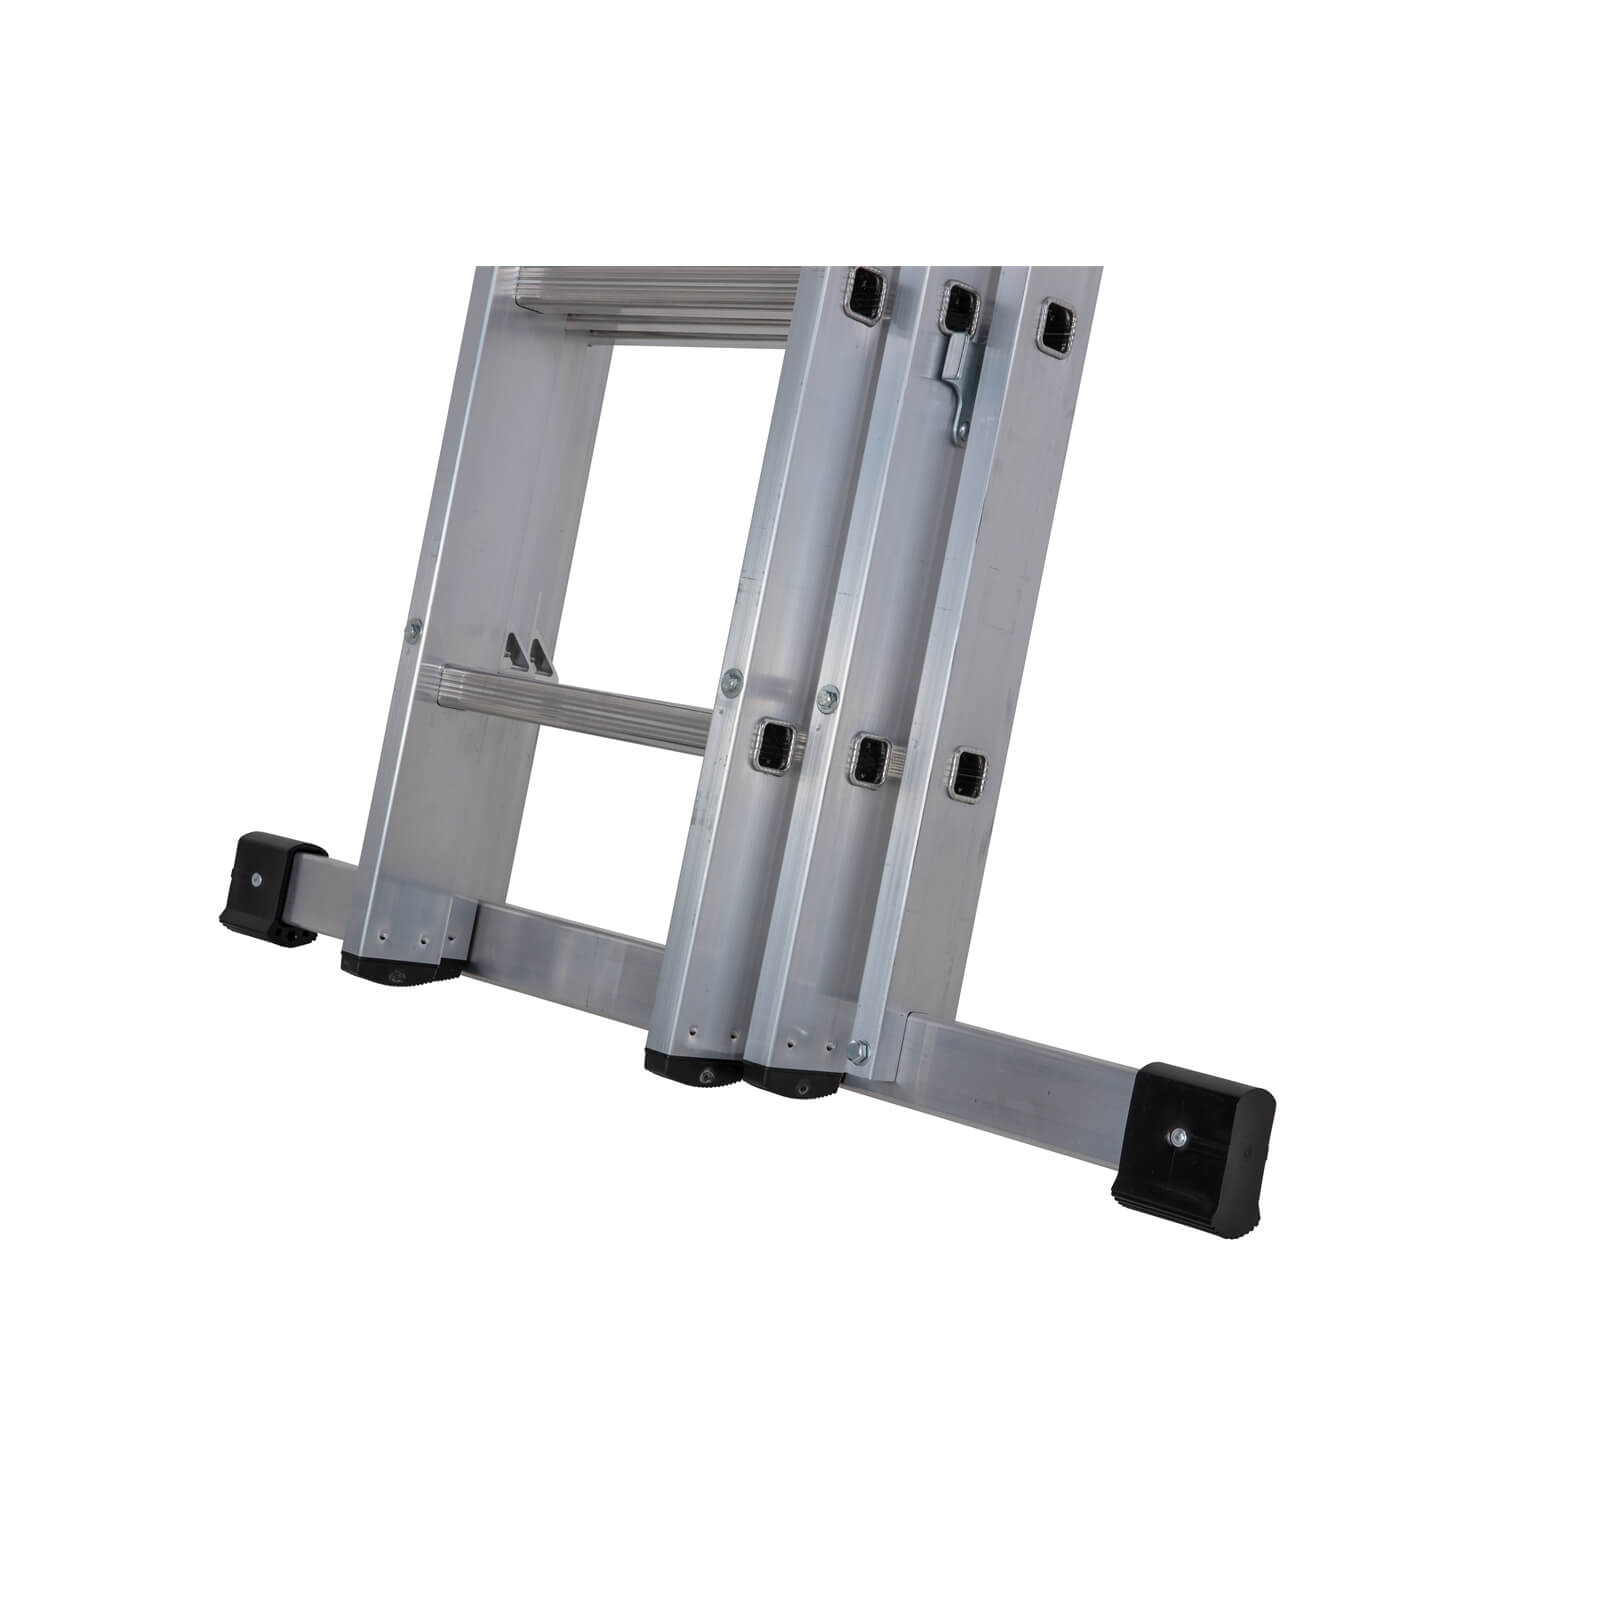 Werner Square Rung Extension Ladder - 3.67m Triple